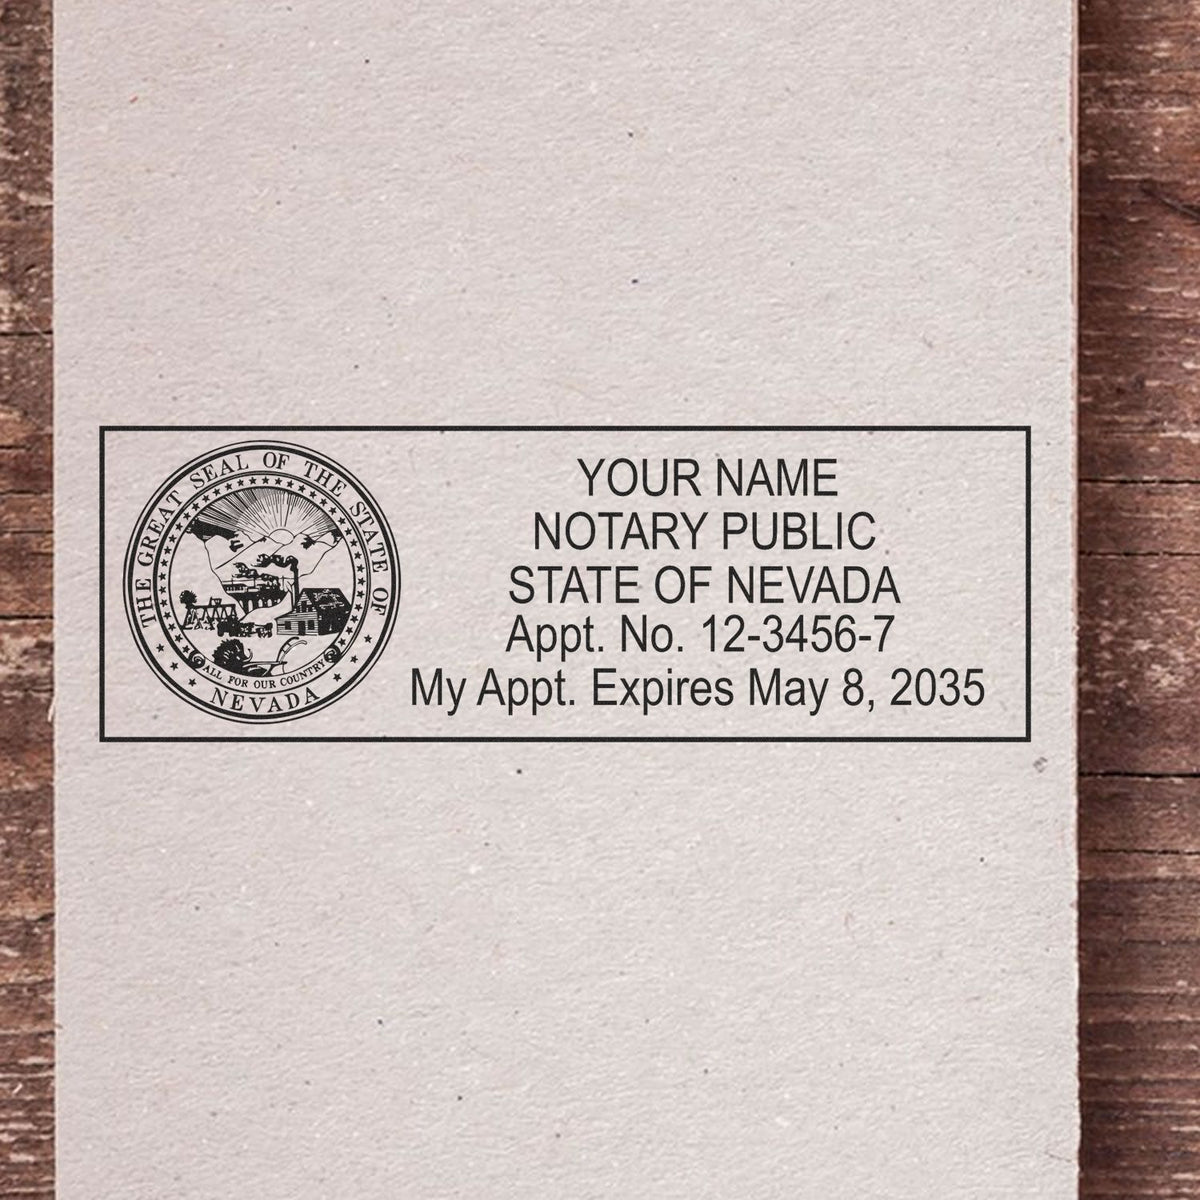 This paper is stamped with a sample imprint of the Super Slim Nevada Notary Public Stamp, signifying its quality and reliability.